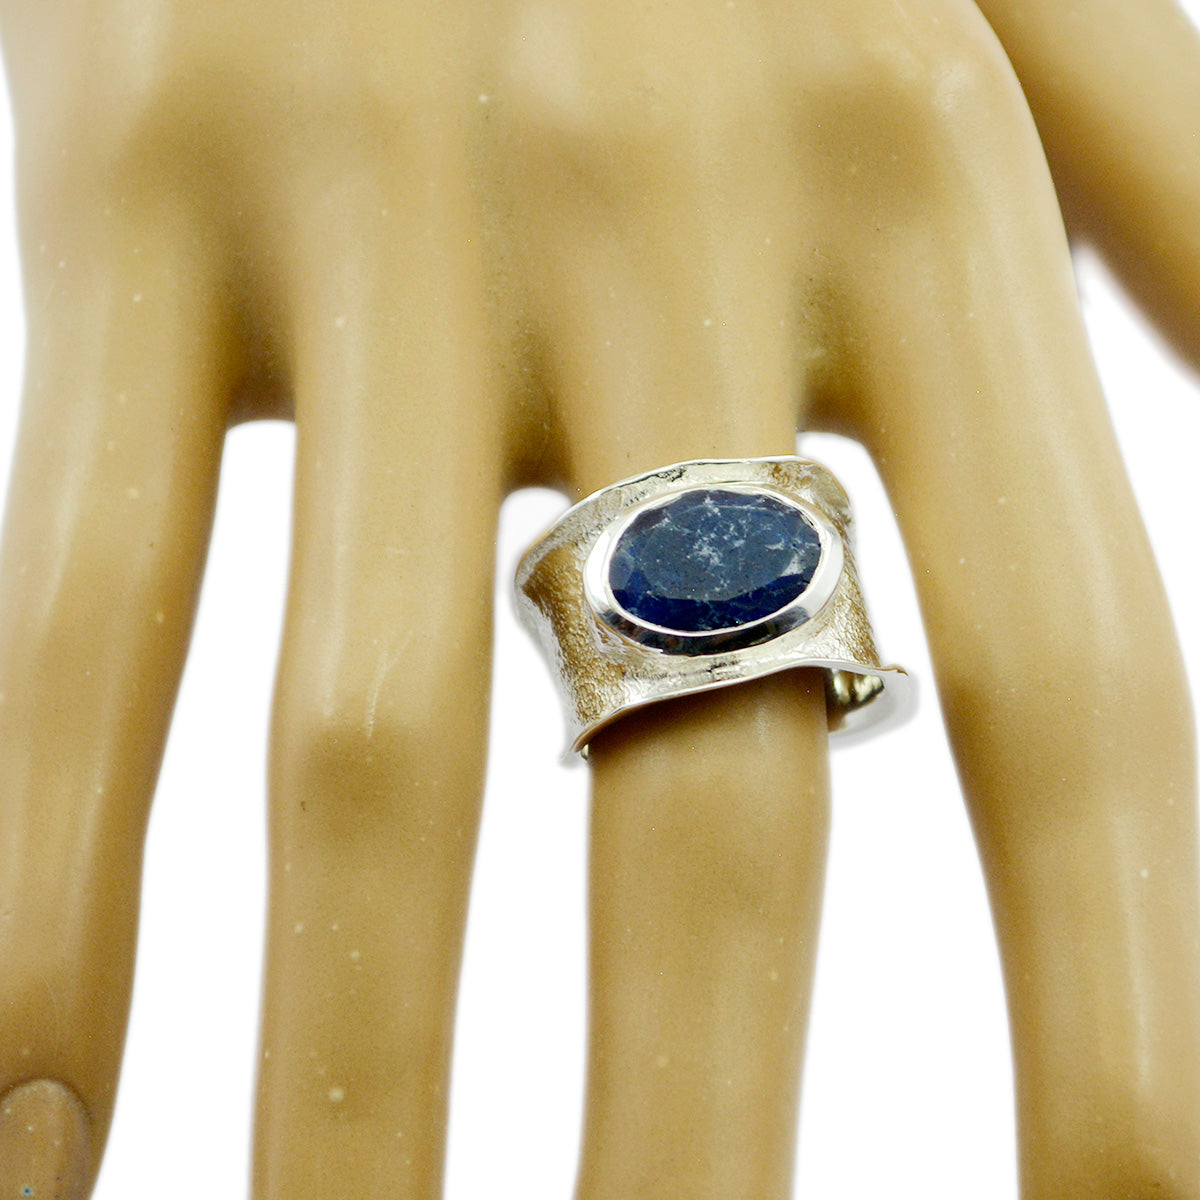 Symmetrical Gem Lapis Lazuli Silver Rings Real Turquoise Jewelry